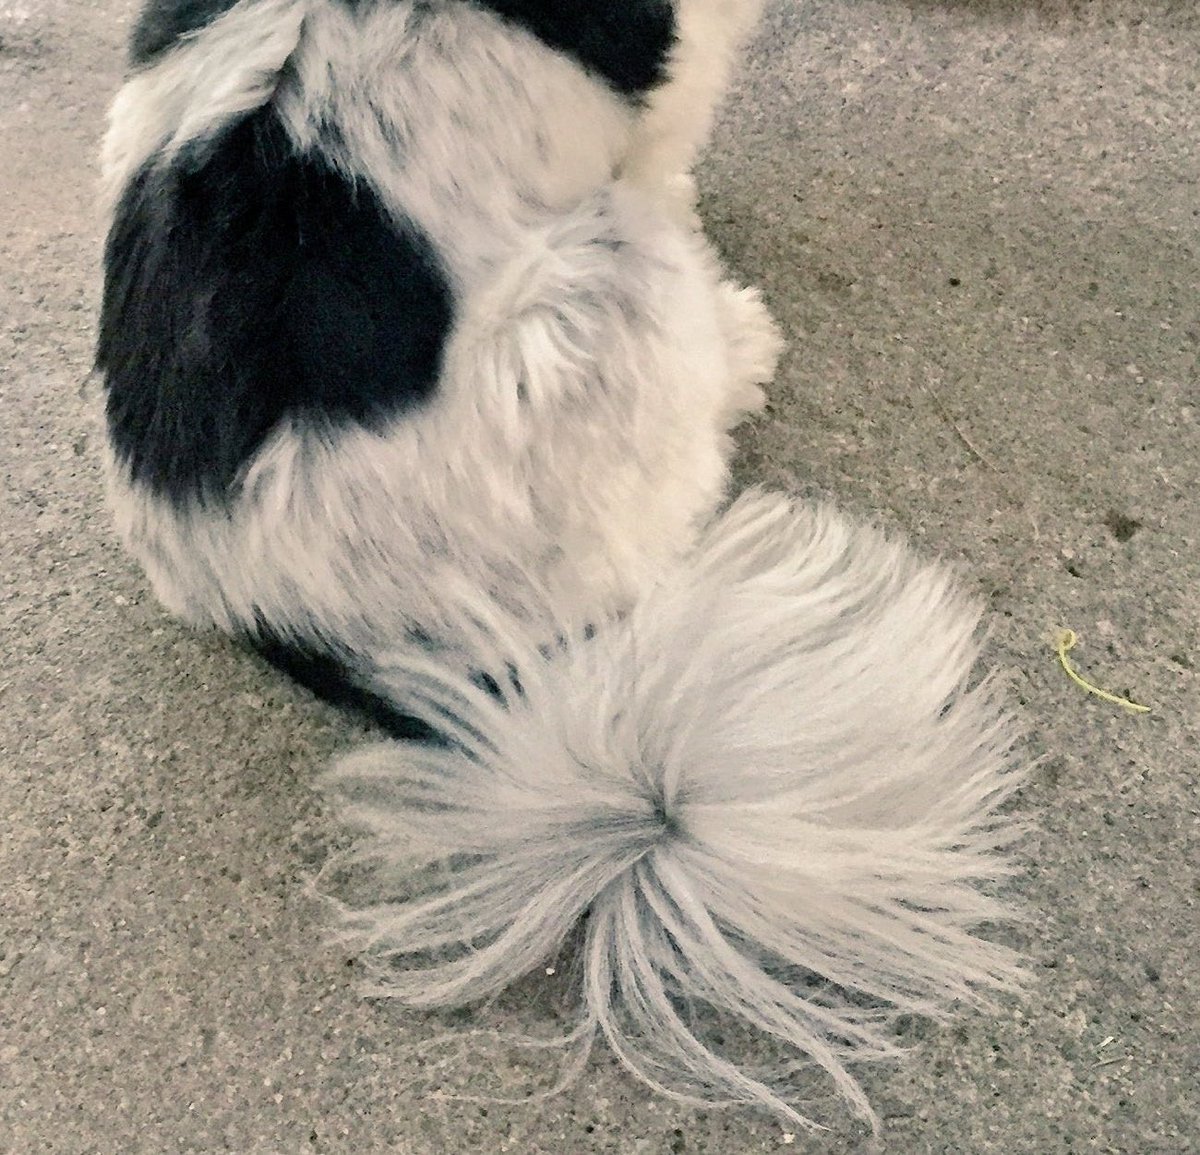 Pals, did yous guys know I has a heart shaped patch on me fur? 😍 perfect for Valentine’s Day ❤️